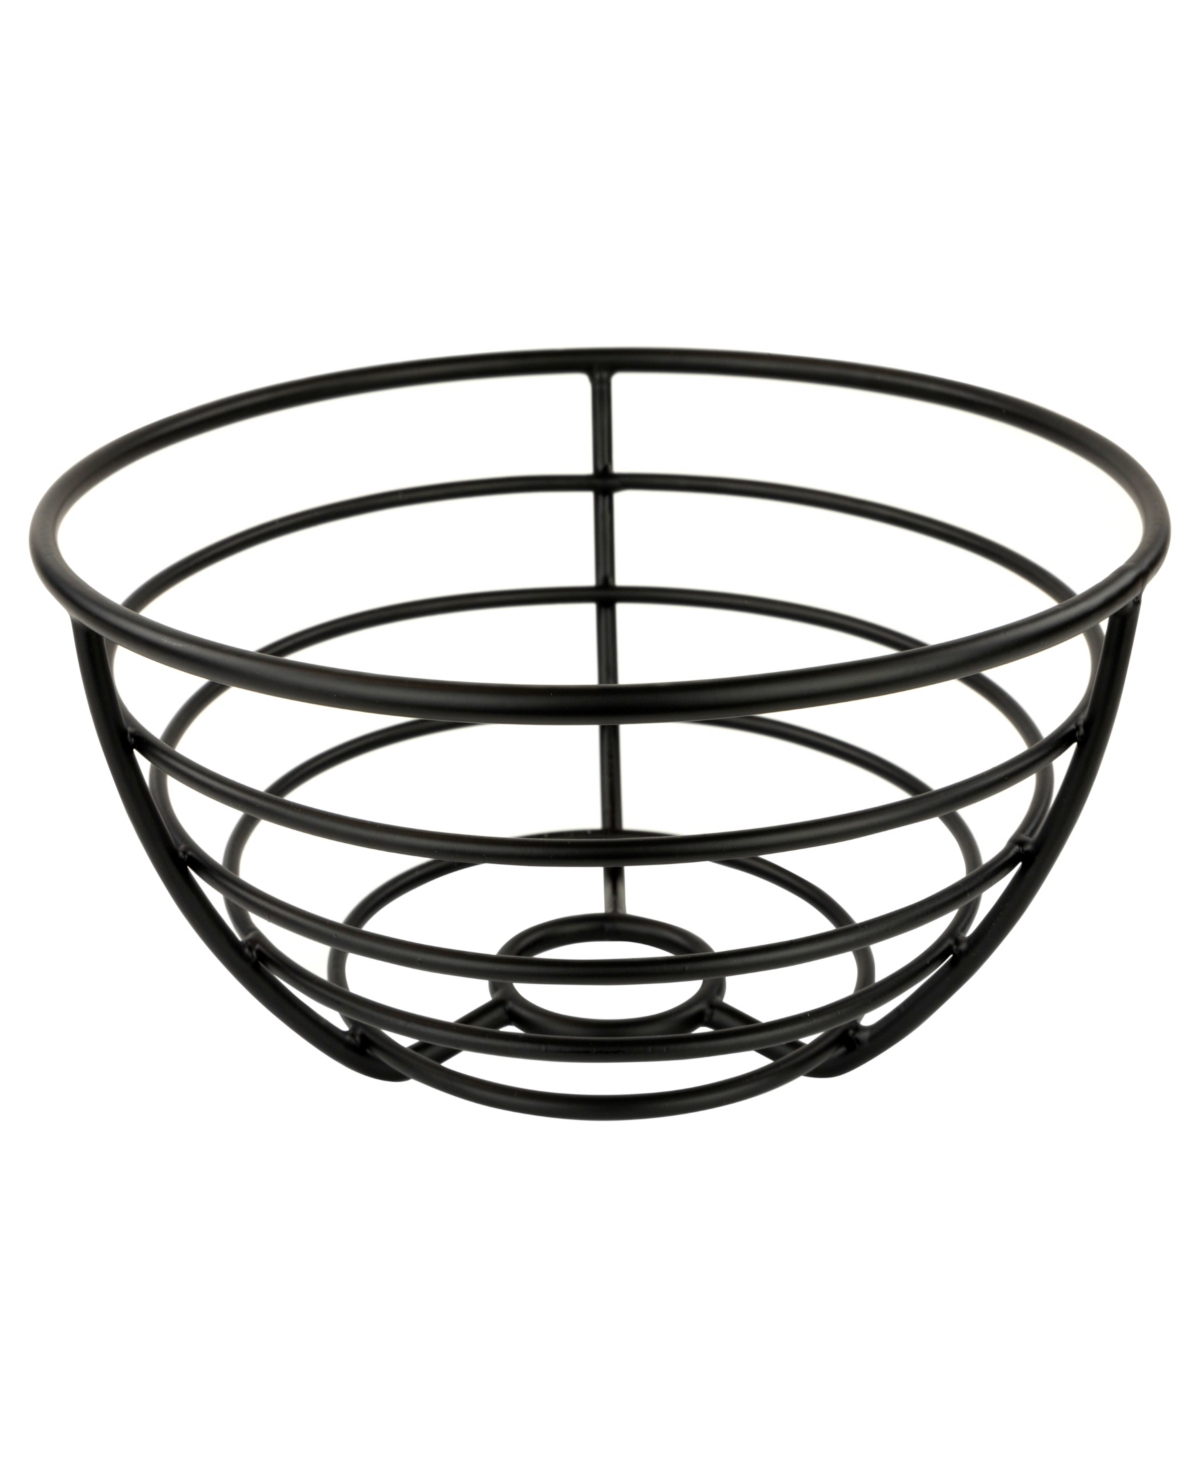 Euro Fruit Bowl for Table Display and Organization - Black